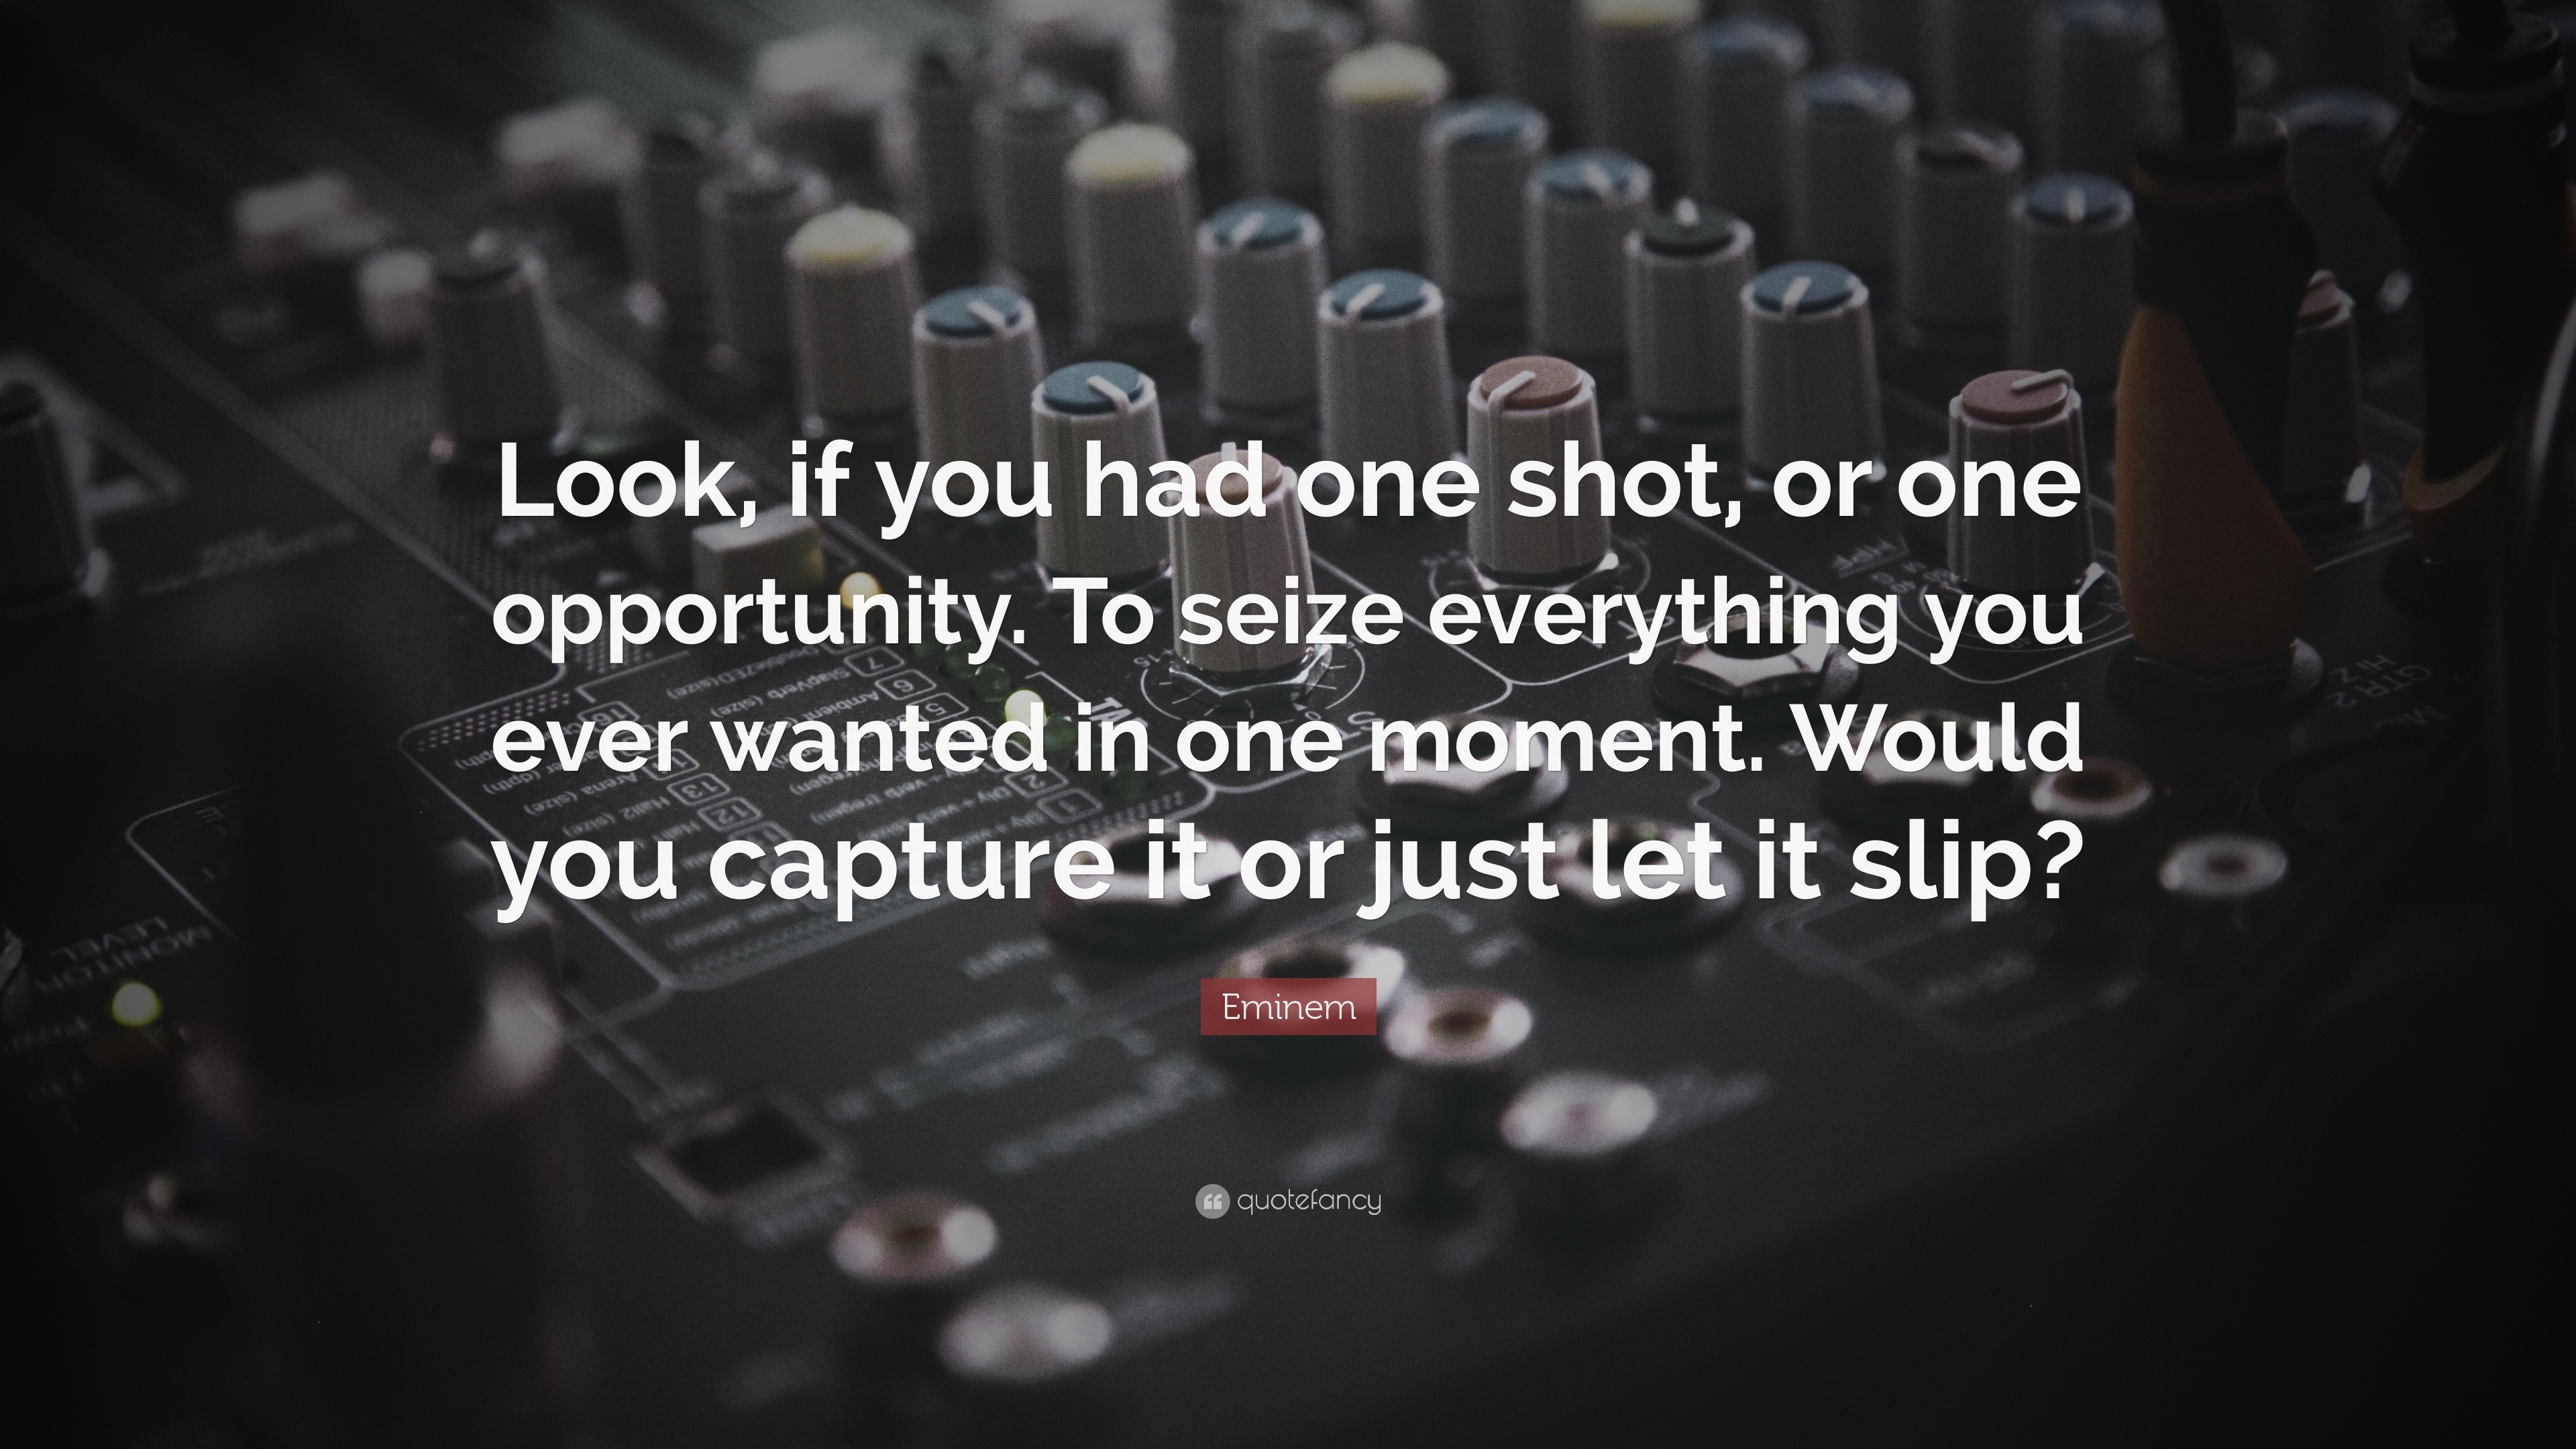 Eminem Quote “Look if you had one shot or one opportunity